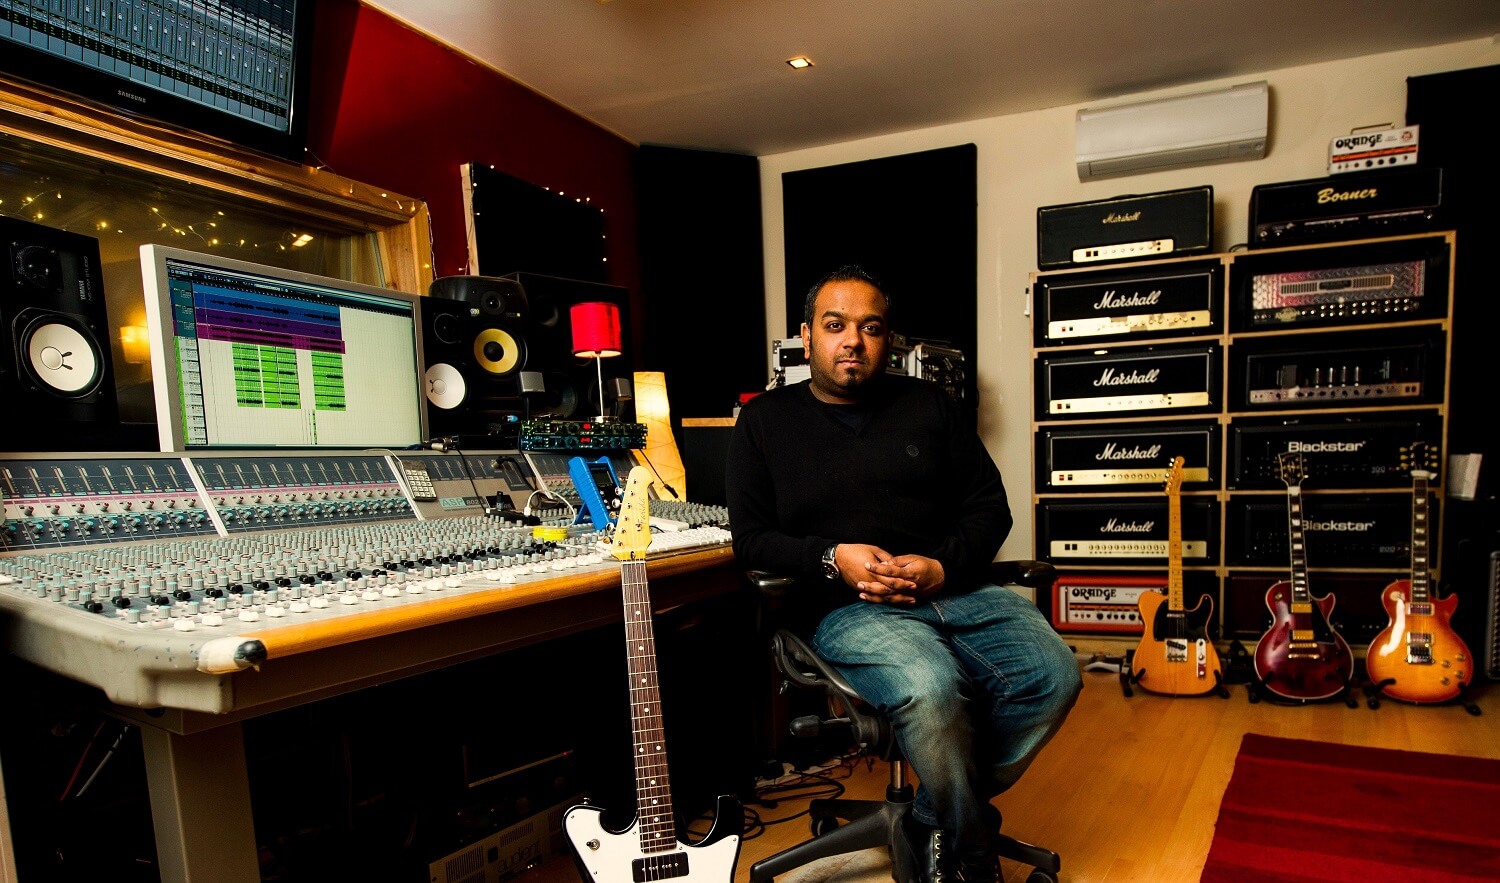 Man sitting at analogue mixing console surrounded by recording gear, guitars etc